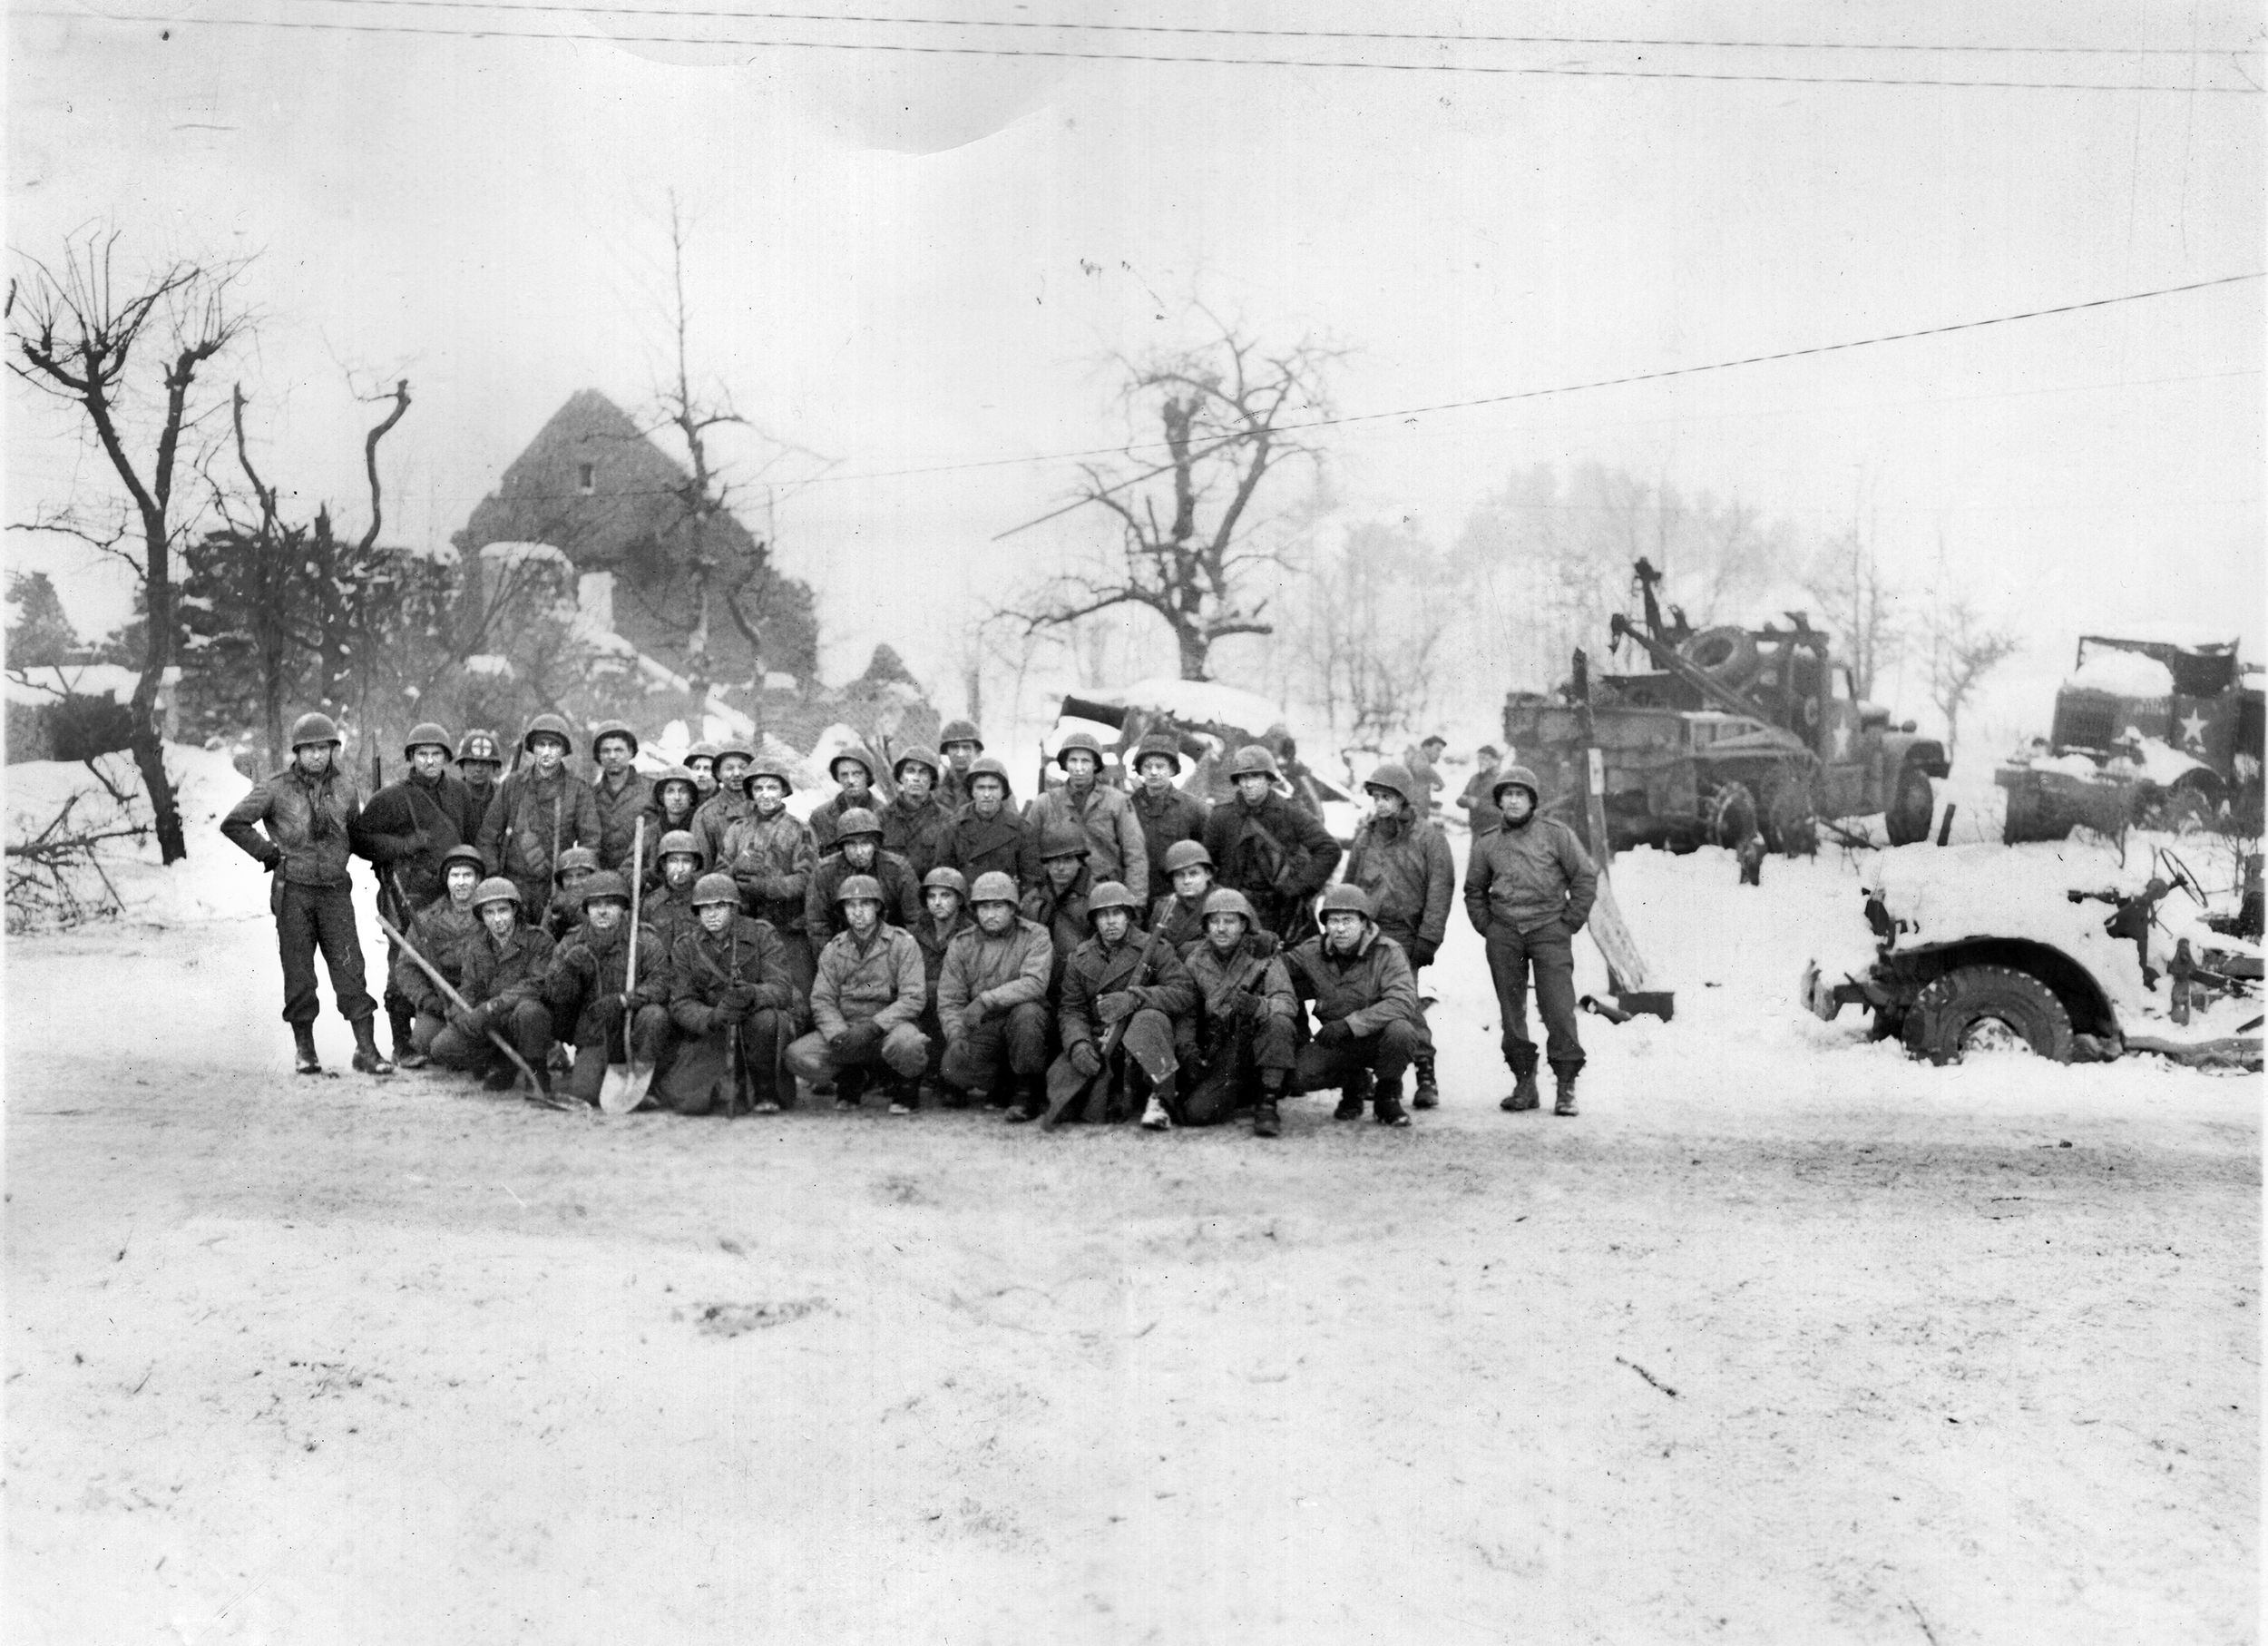 Men of Lt. Col. David E. Pergrin’s, 291st Combat Engineer Battalion were stationed in Malmedy at the time of the attack and heard German machine gun fire at the Baugnez crossroads. Company C, pictured here, was among the first to discover the bodies. Pergrin’s report alerted U.S. First Army Headquarters and word of the massacre spread through the American Army. 